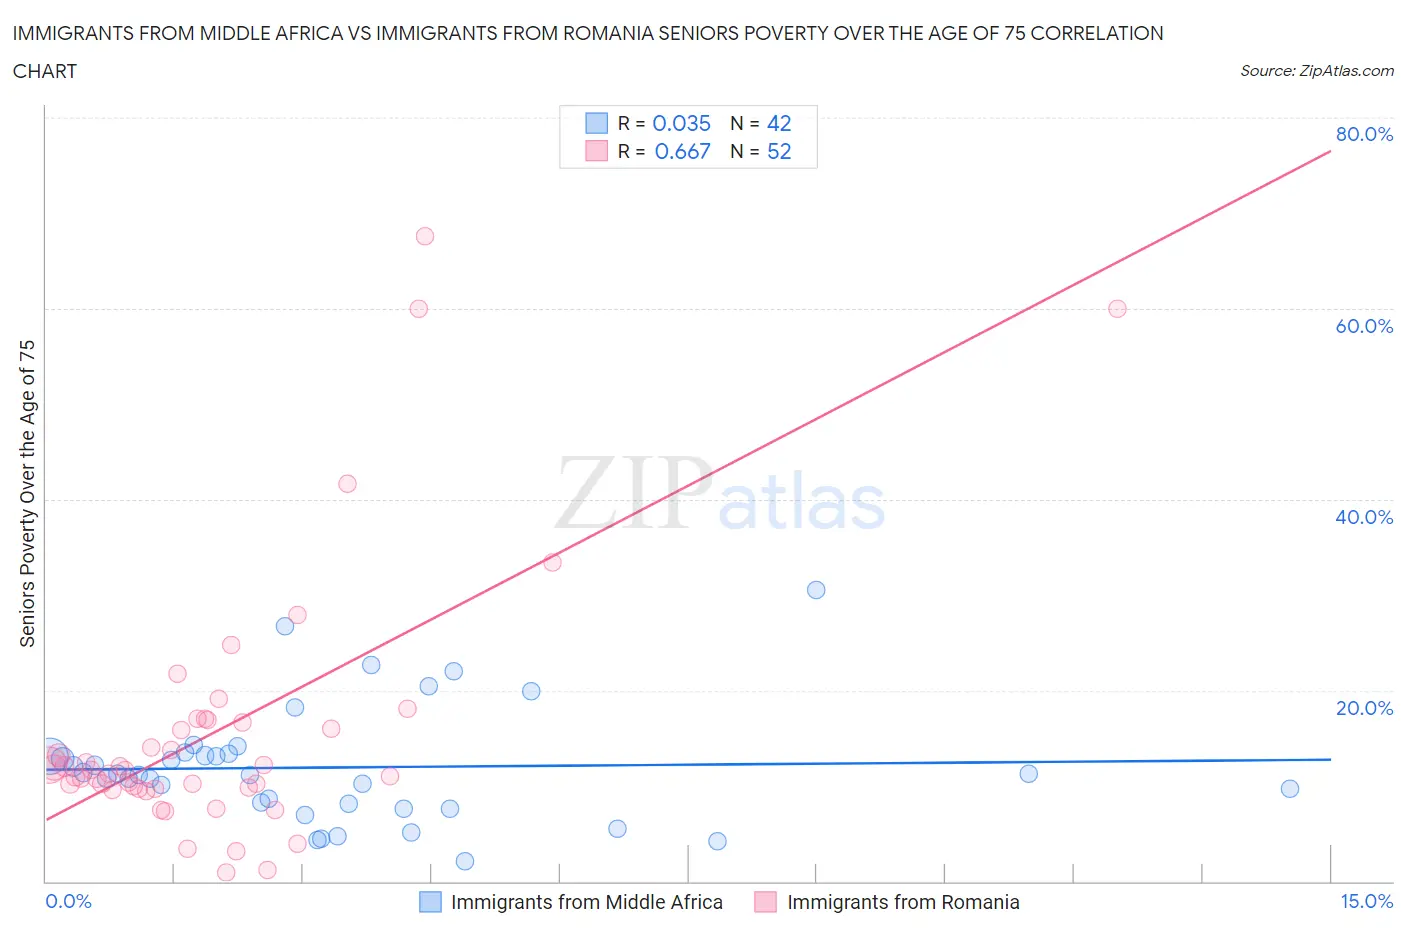 Immigrants from Middle Africa vs Immigrants from Romania Seniors Poverty Over the Age of 75